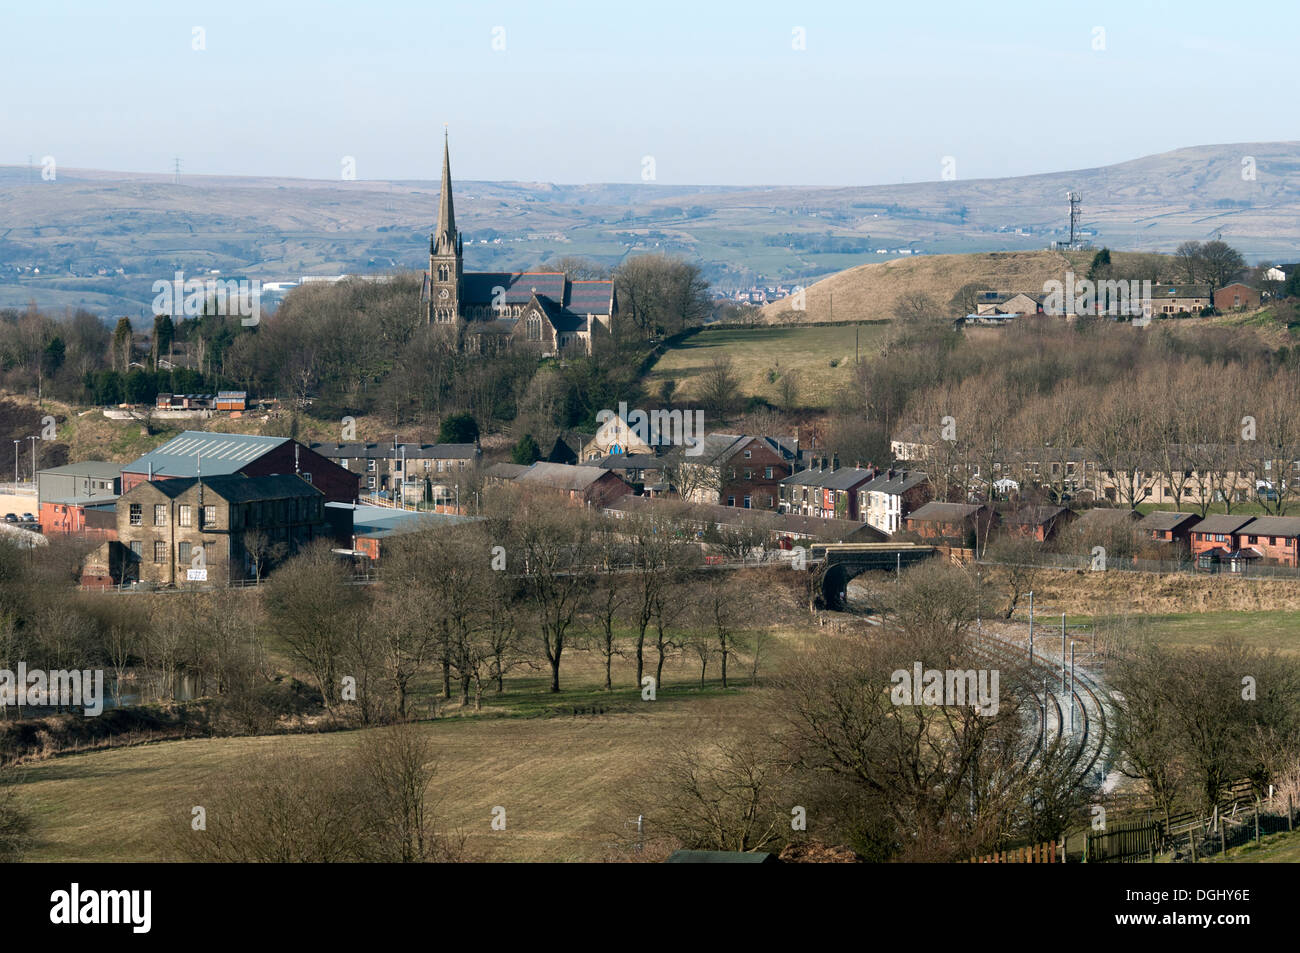 St Thomas' Church over the Beal valley, Newhey, Rochdale, Greater Manchester England, UK. Metrolink tram tracks in foreground. Stock Photo